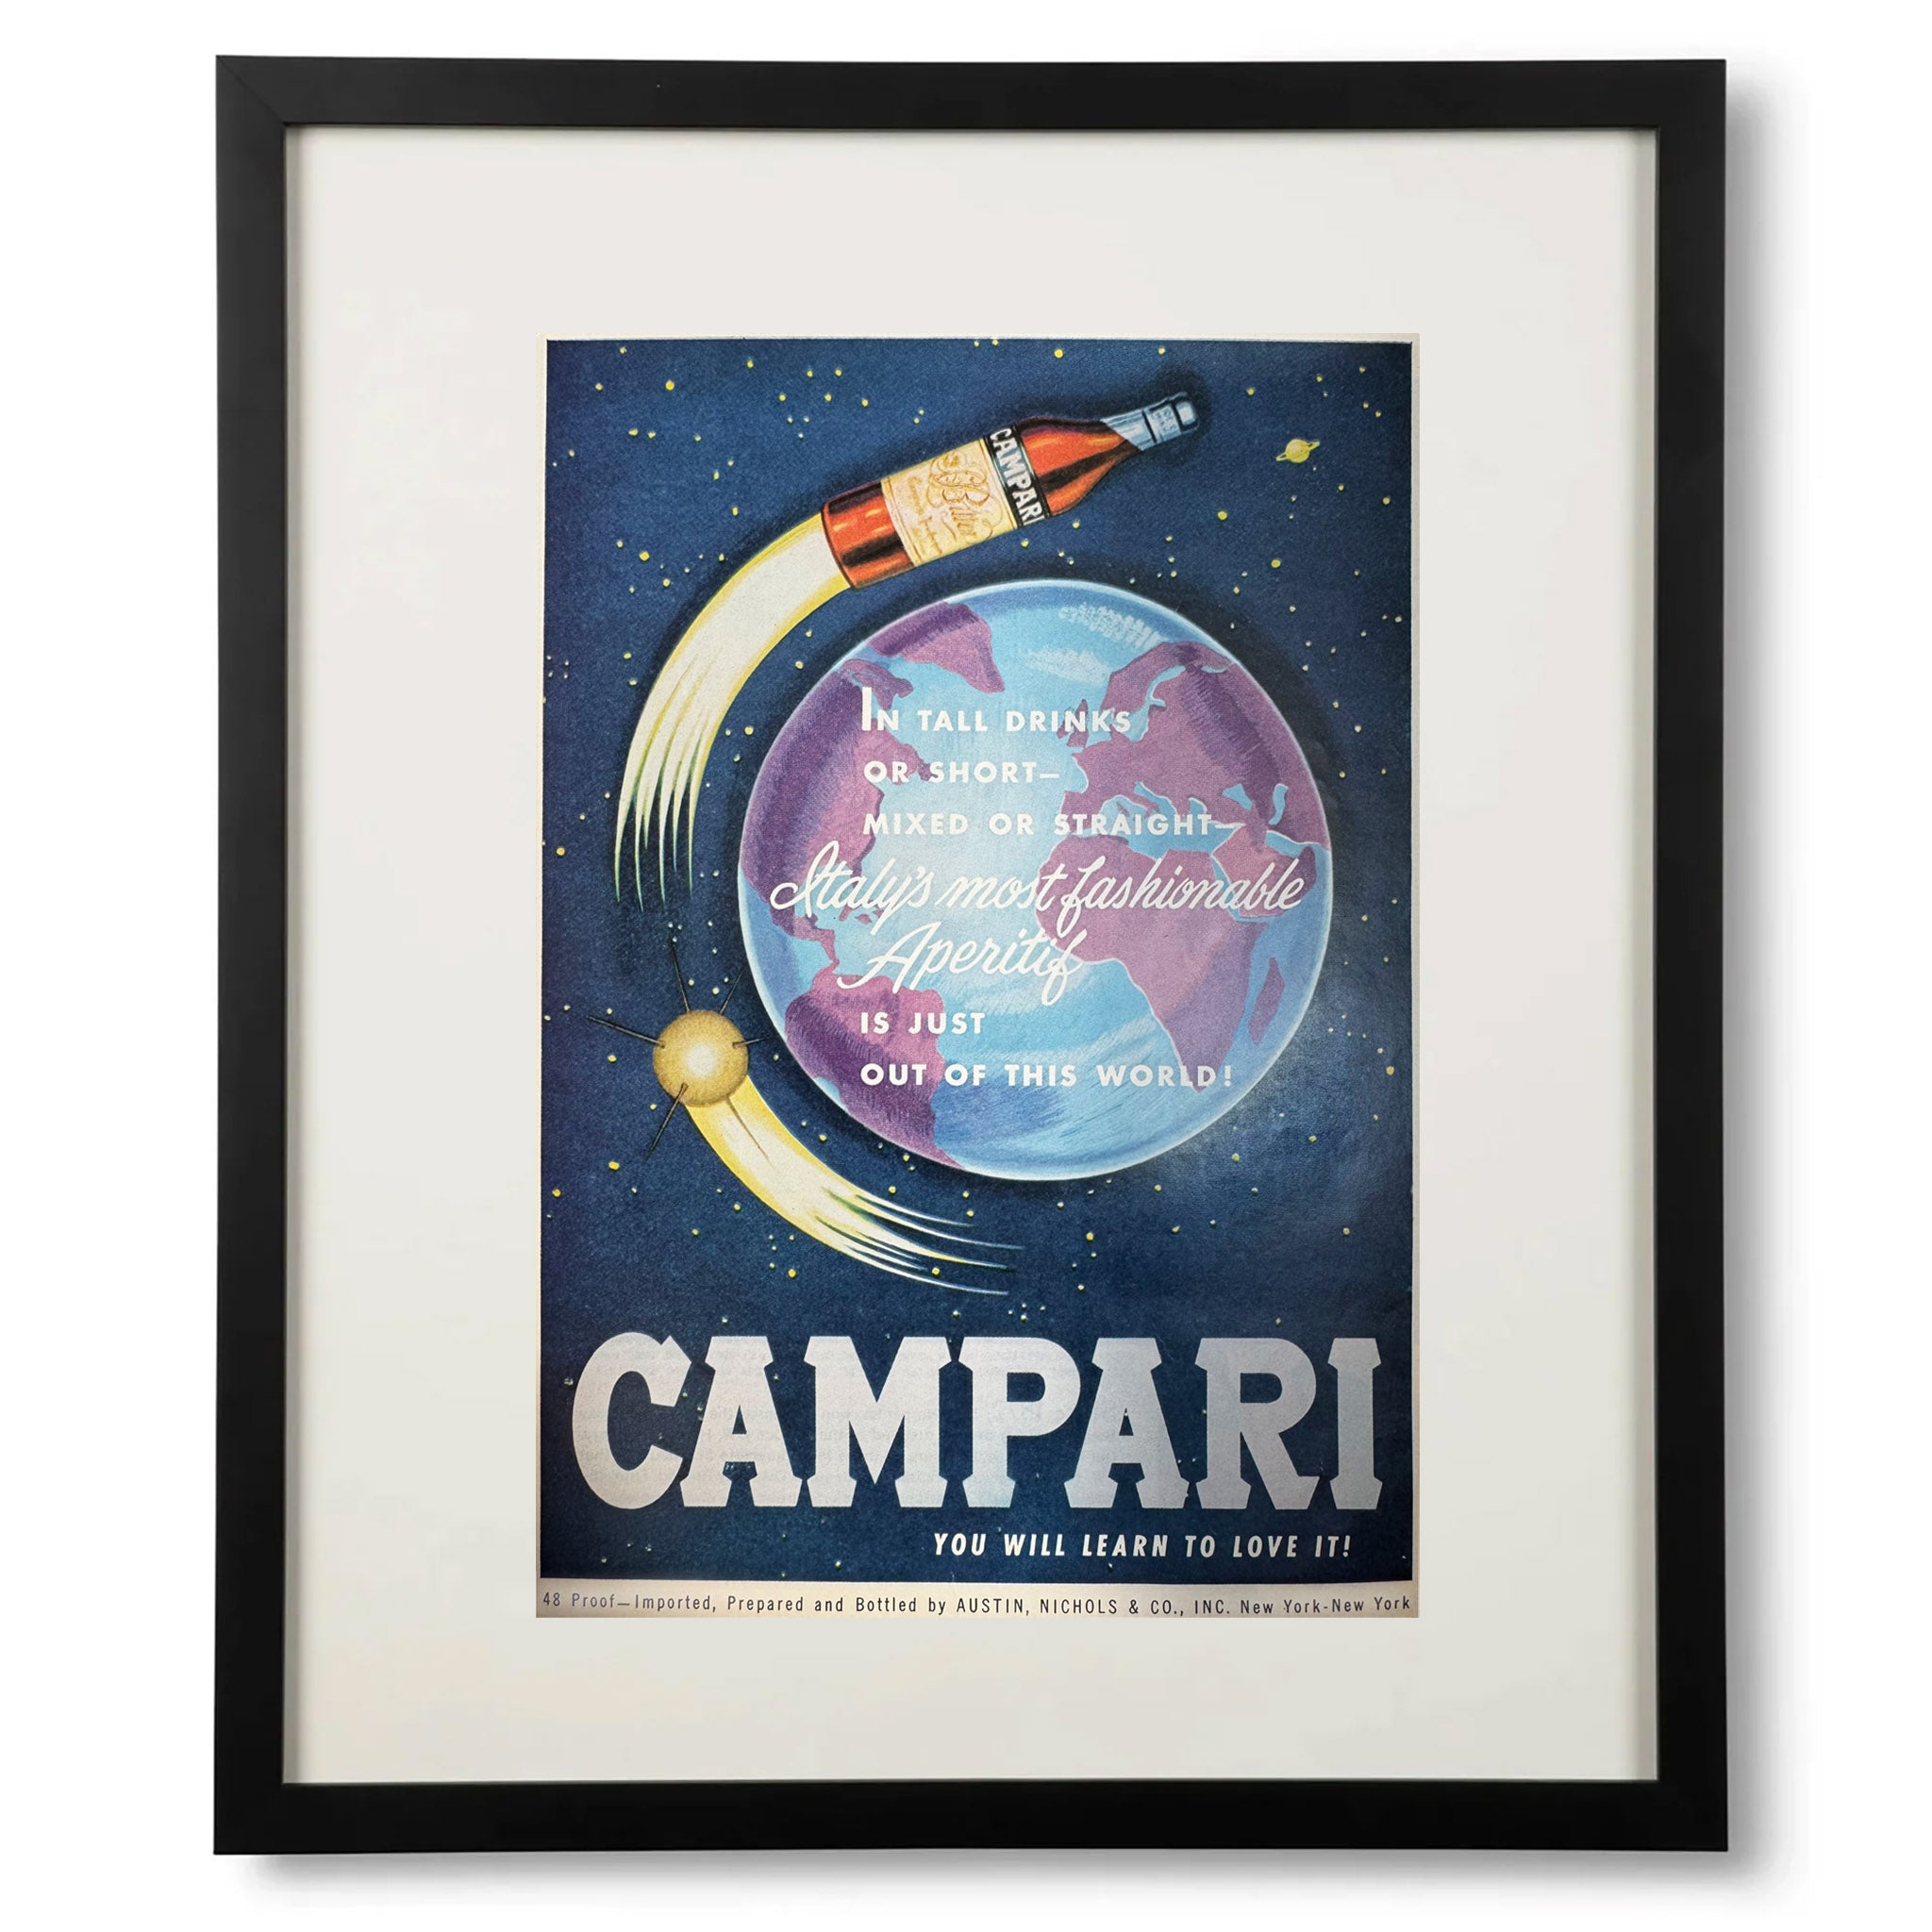 Campari Out of This World Advertisement